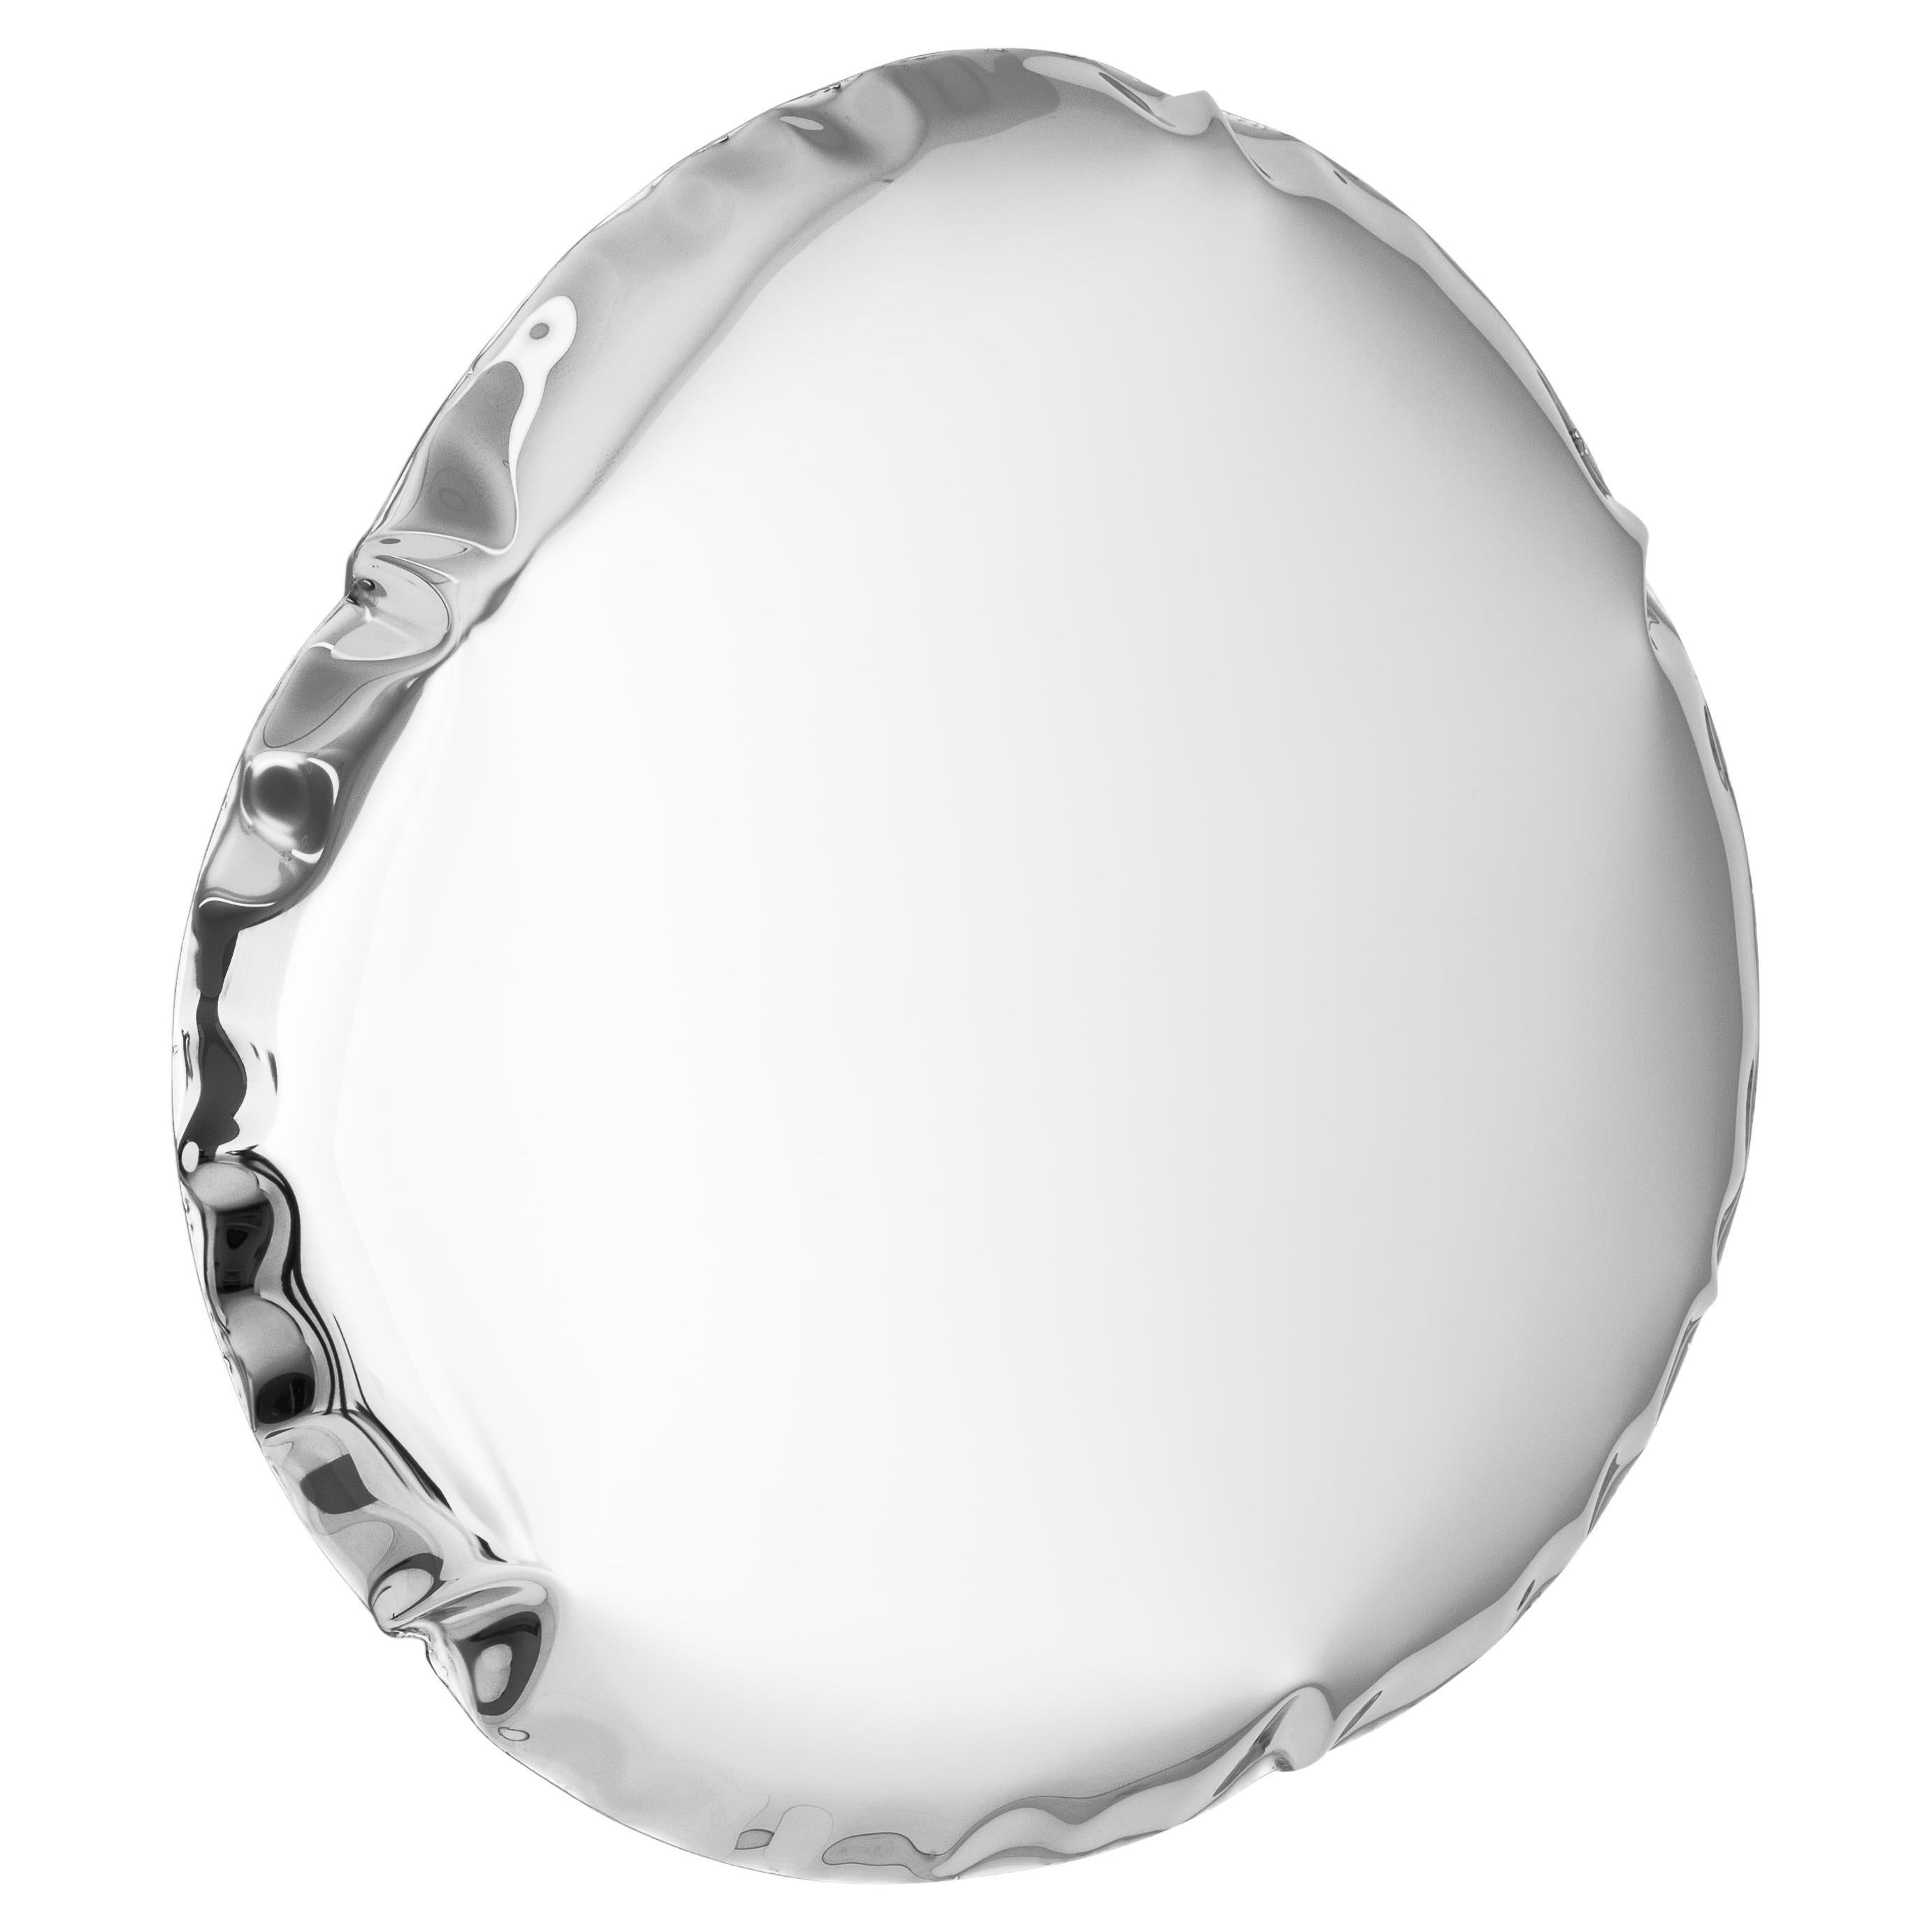 In Stock Tafla O6 Polished Stainless Steel Wall Mirror by Zieta